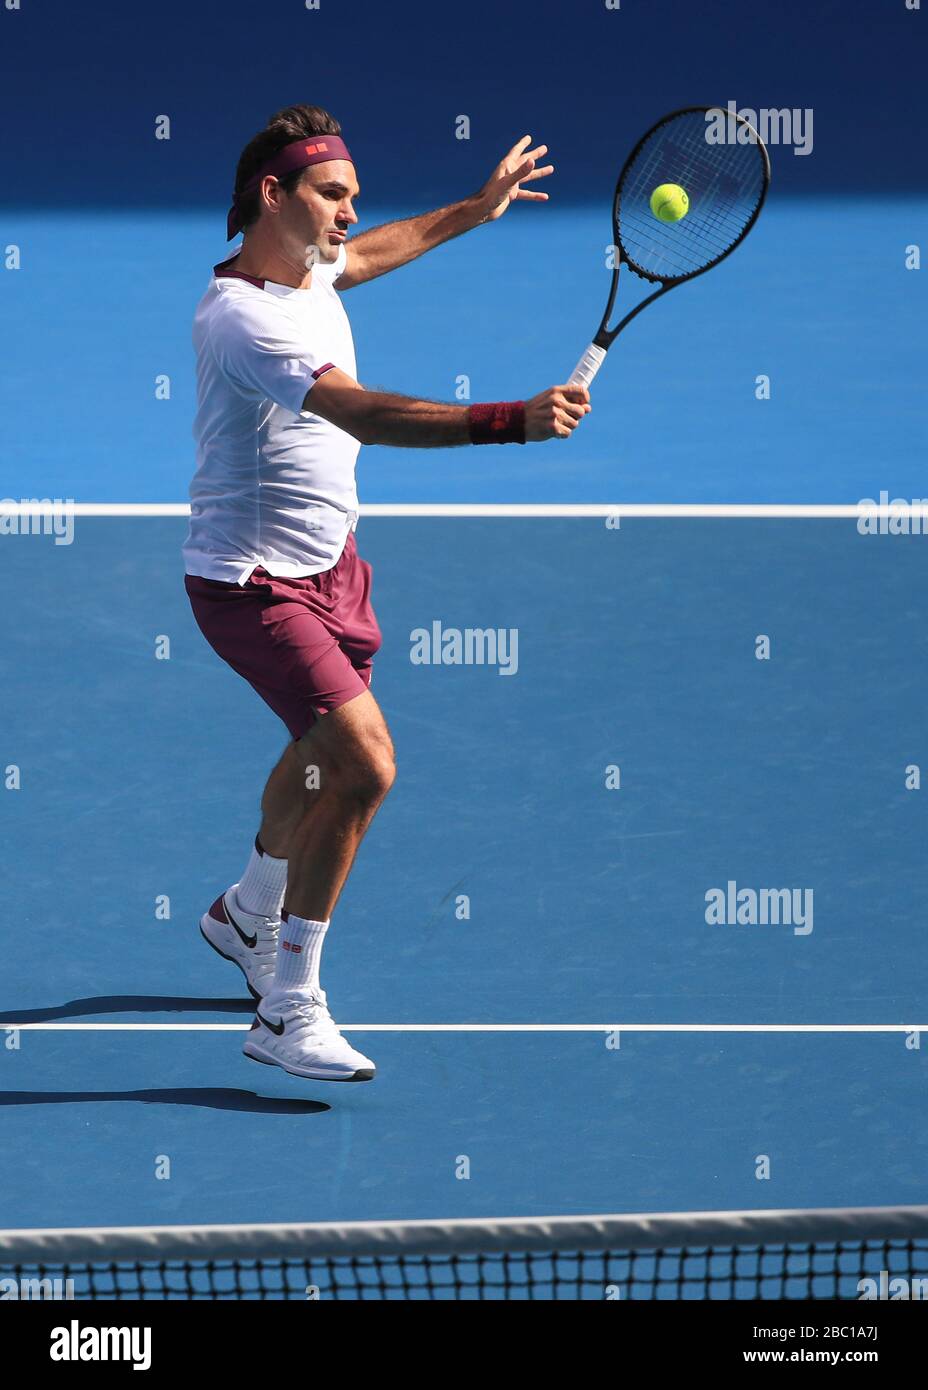 Swiss tennis player Roger Federer (SUI) playing forehand volley shot , Australian Open 2020 tennis tournament, Melbourne Park, Melbourne, Victoria, Au Stock Photo